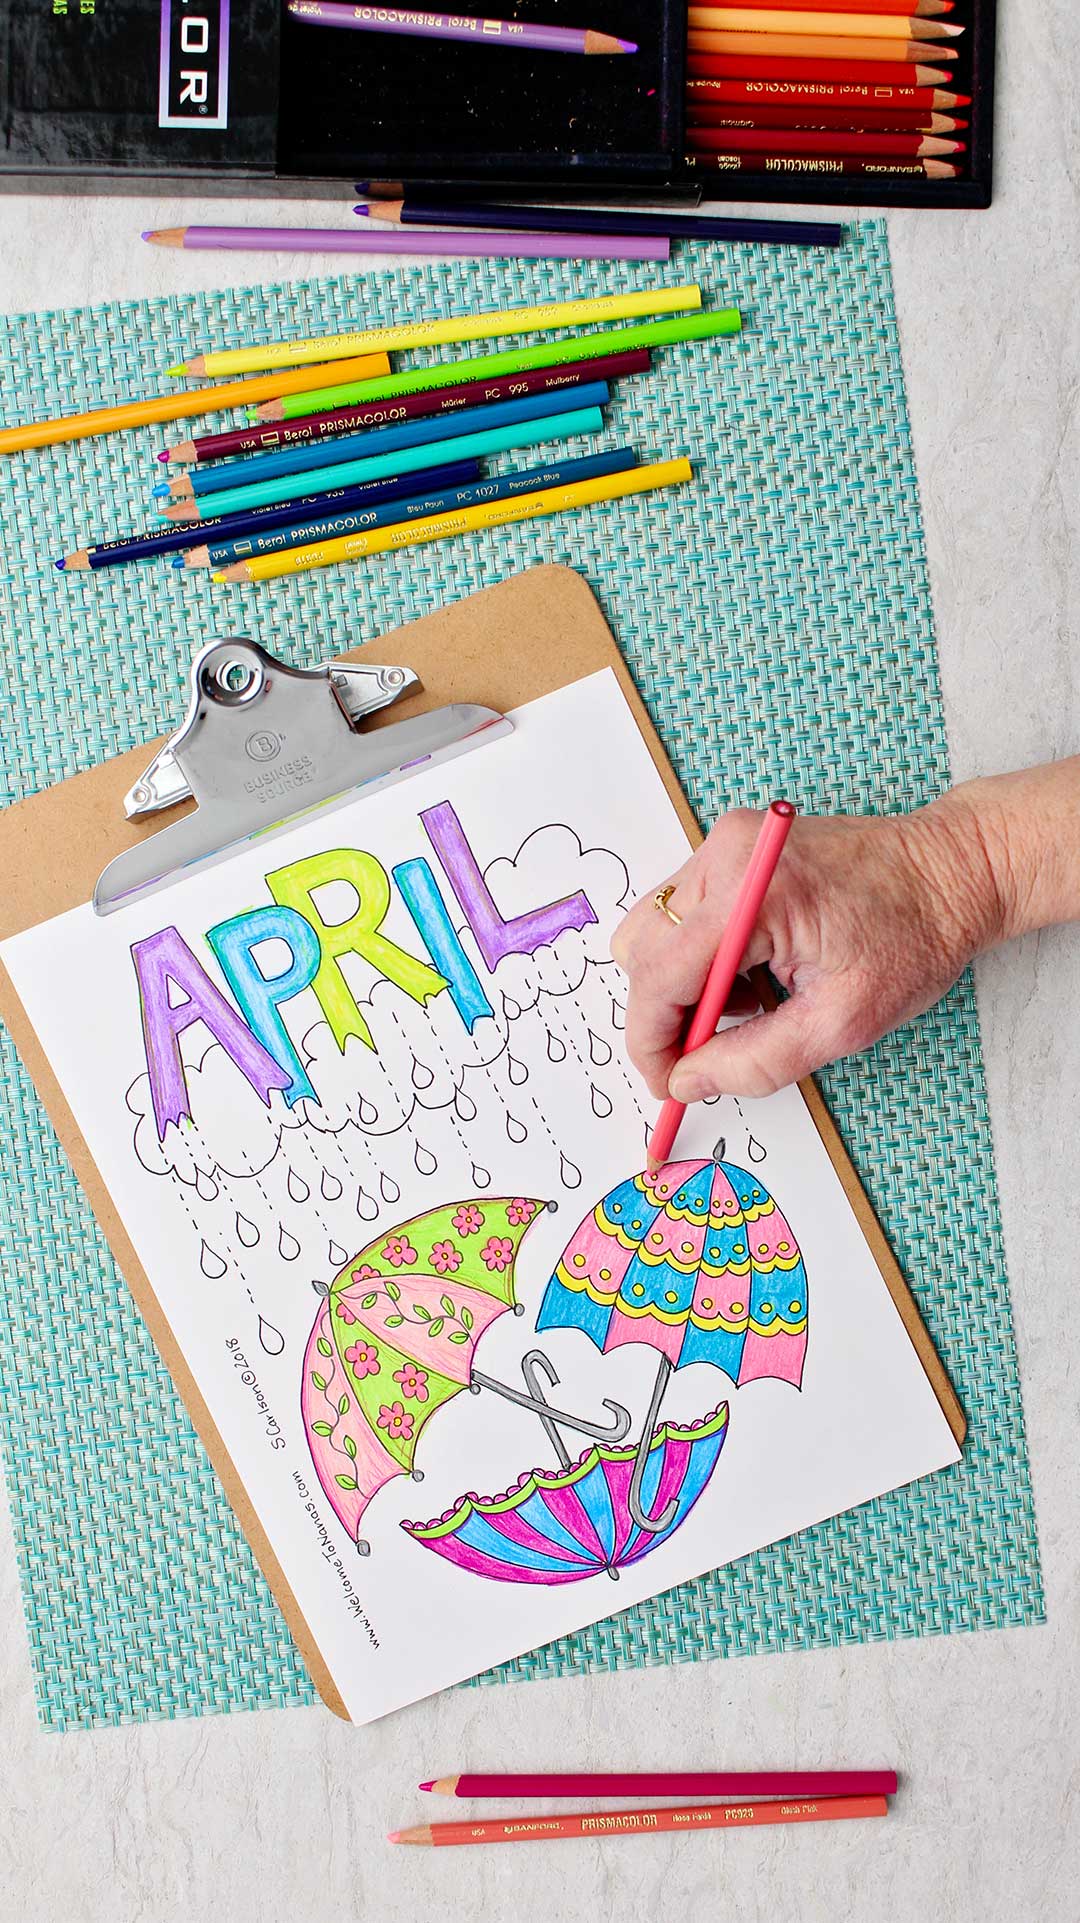 Hand coloring part of an umbrella pink in the April Showers Coloring Page sitting on an aqua placemat with colored pencils around.